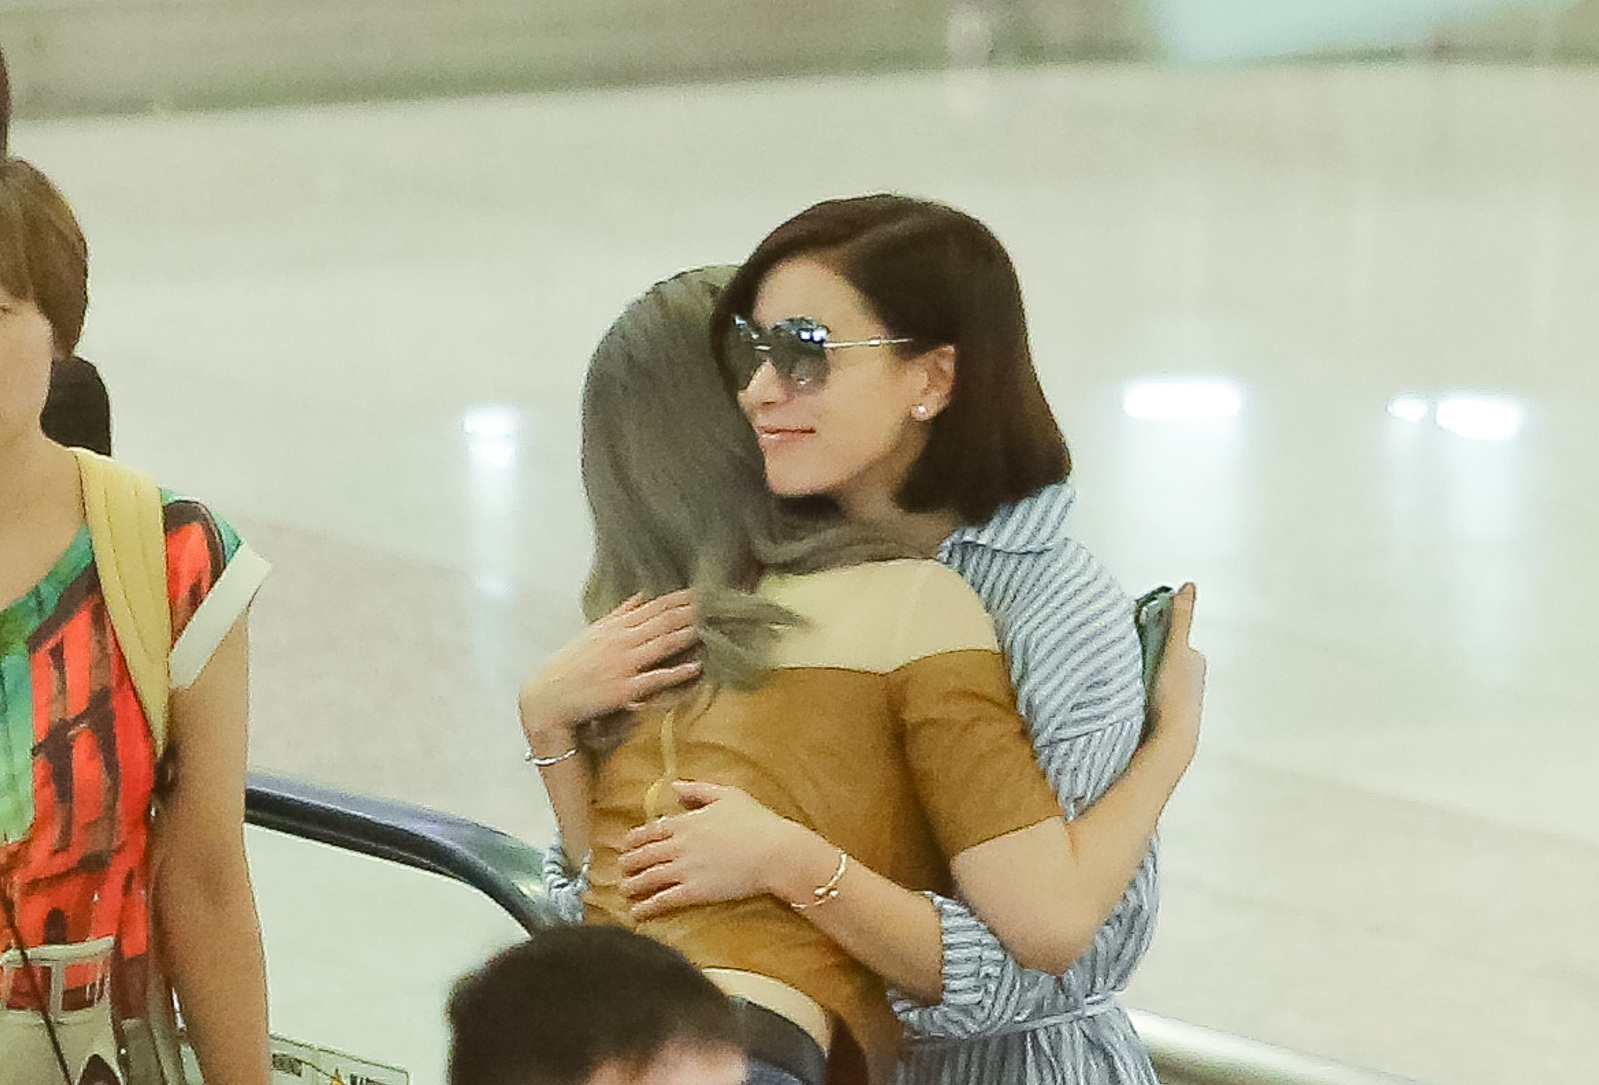 Ly Nha Ky - Charmaine Sheh gave each other warm hugs of reunion